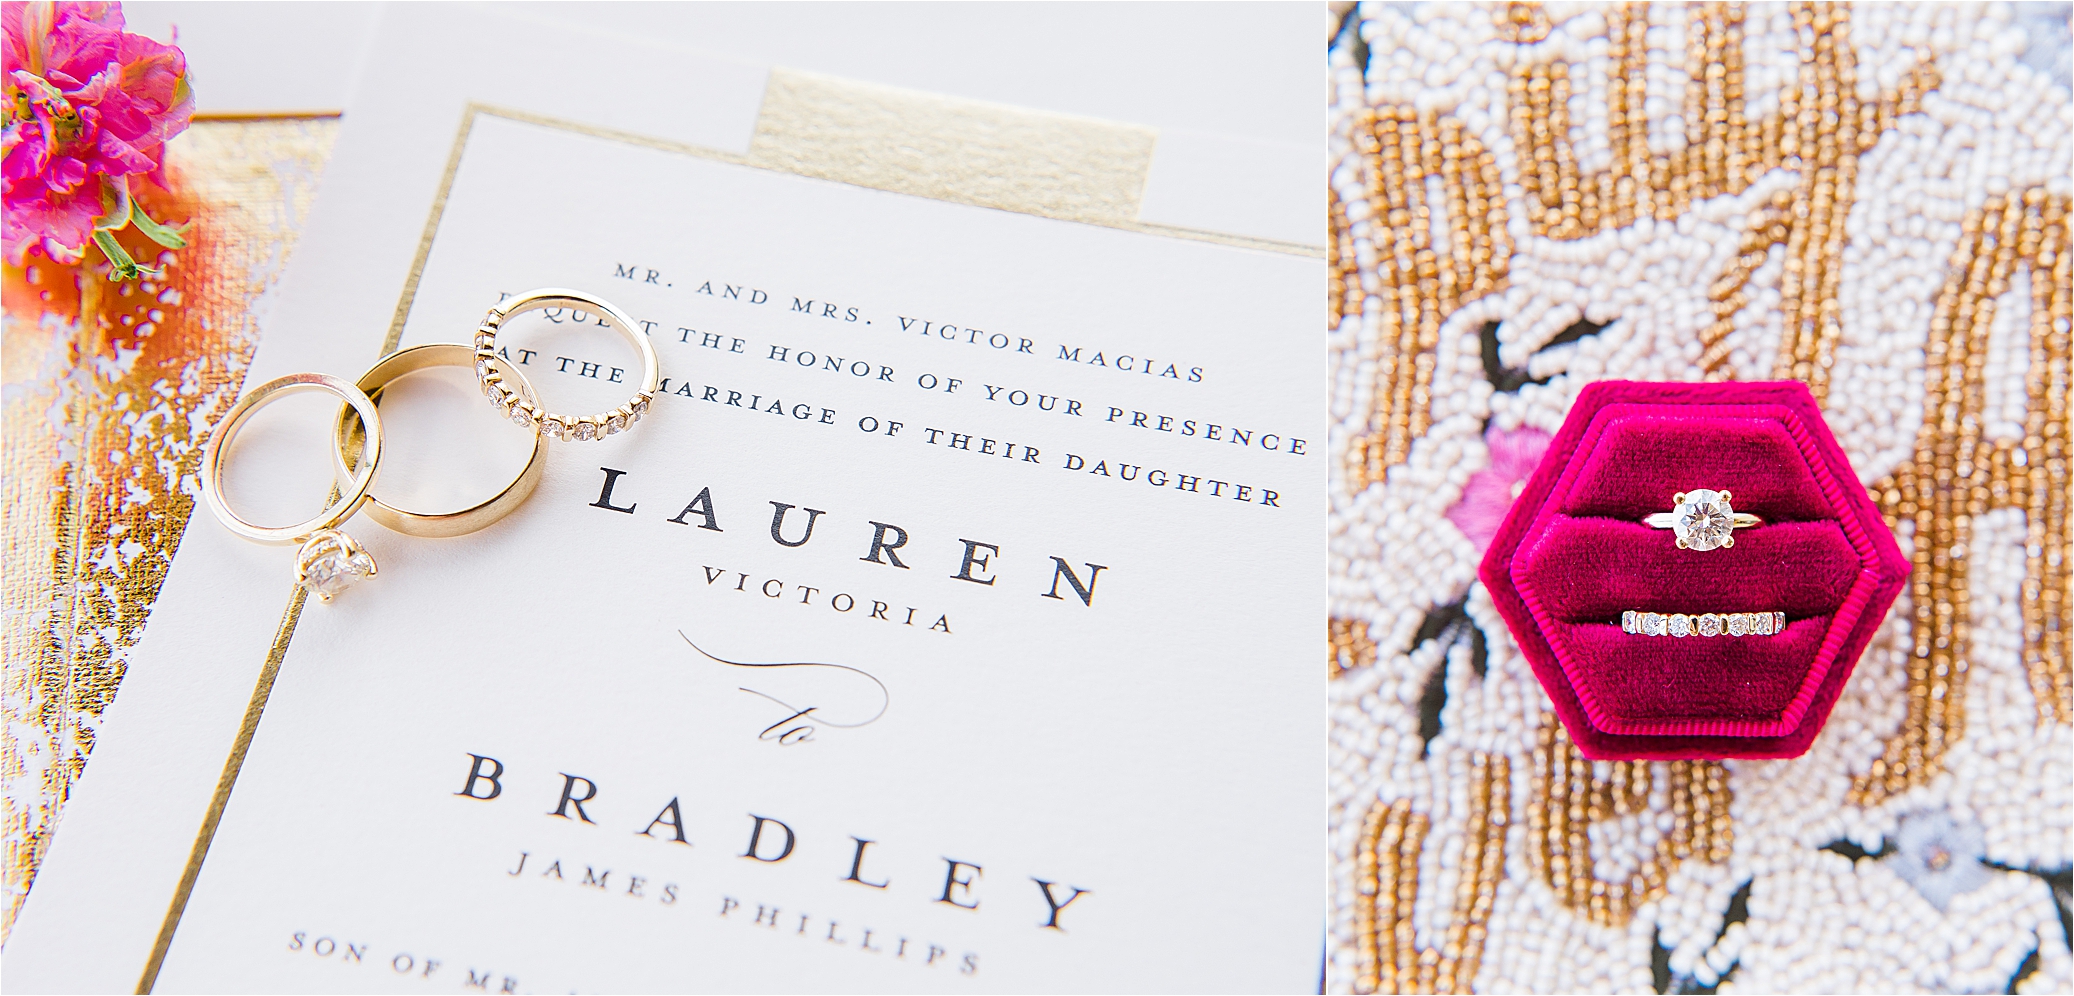 Wedding Rings on an invitation for bridal details at Paniolo Ranch in the Texas Hill Country 